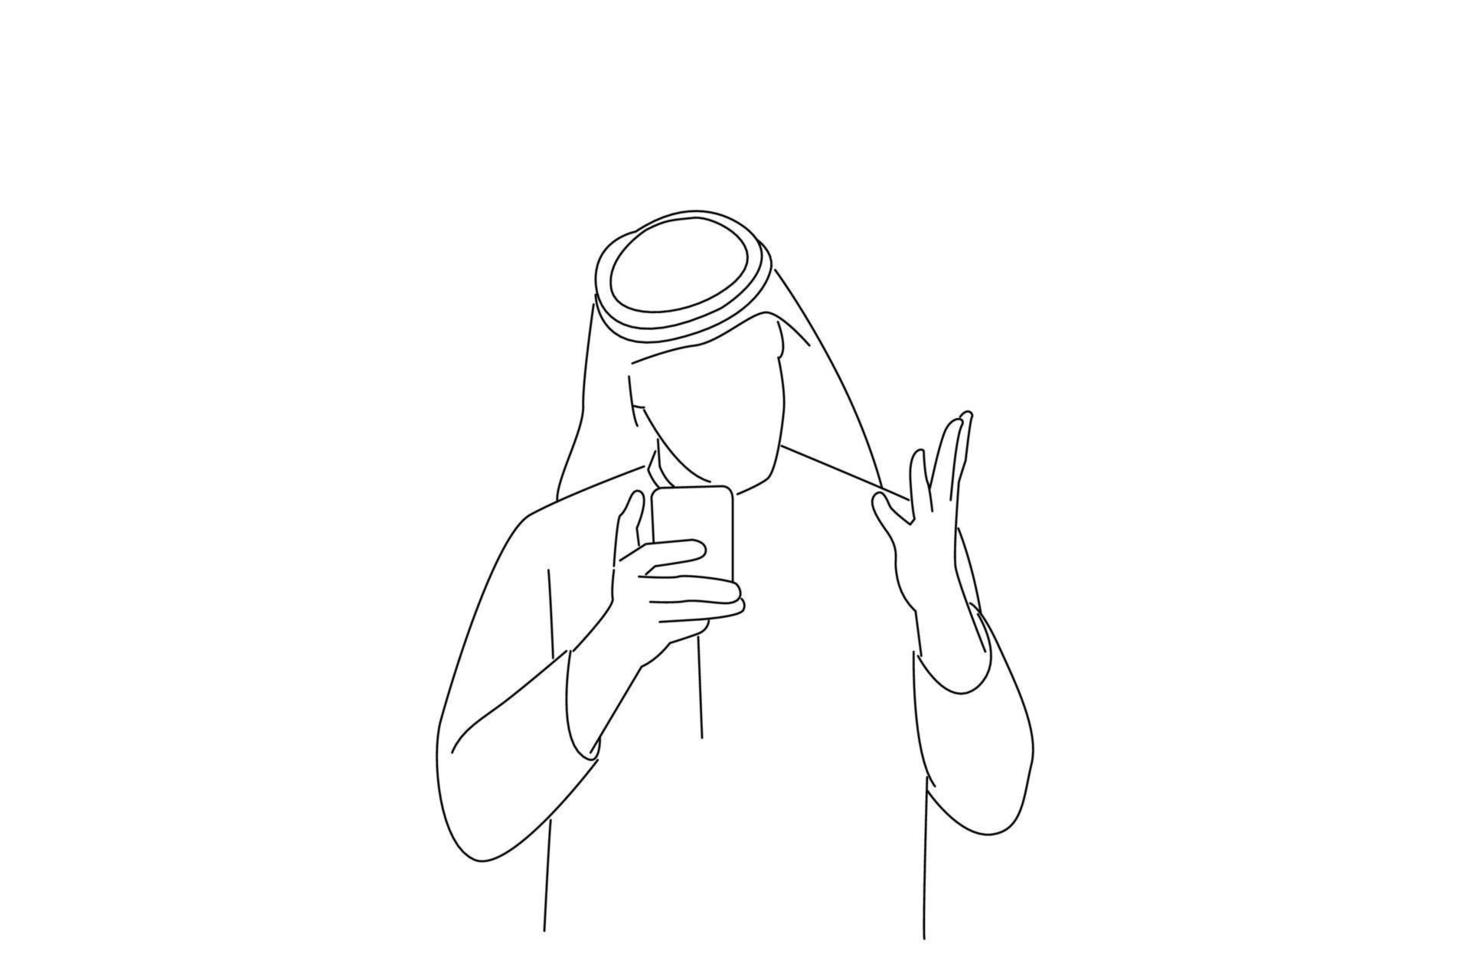 Drawing of arabian businessman expressing anger on the phone. Line art style vector